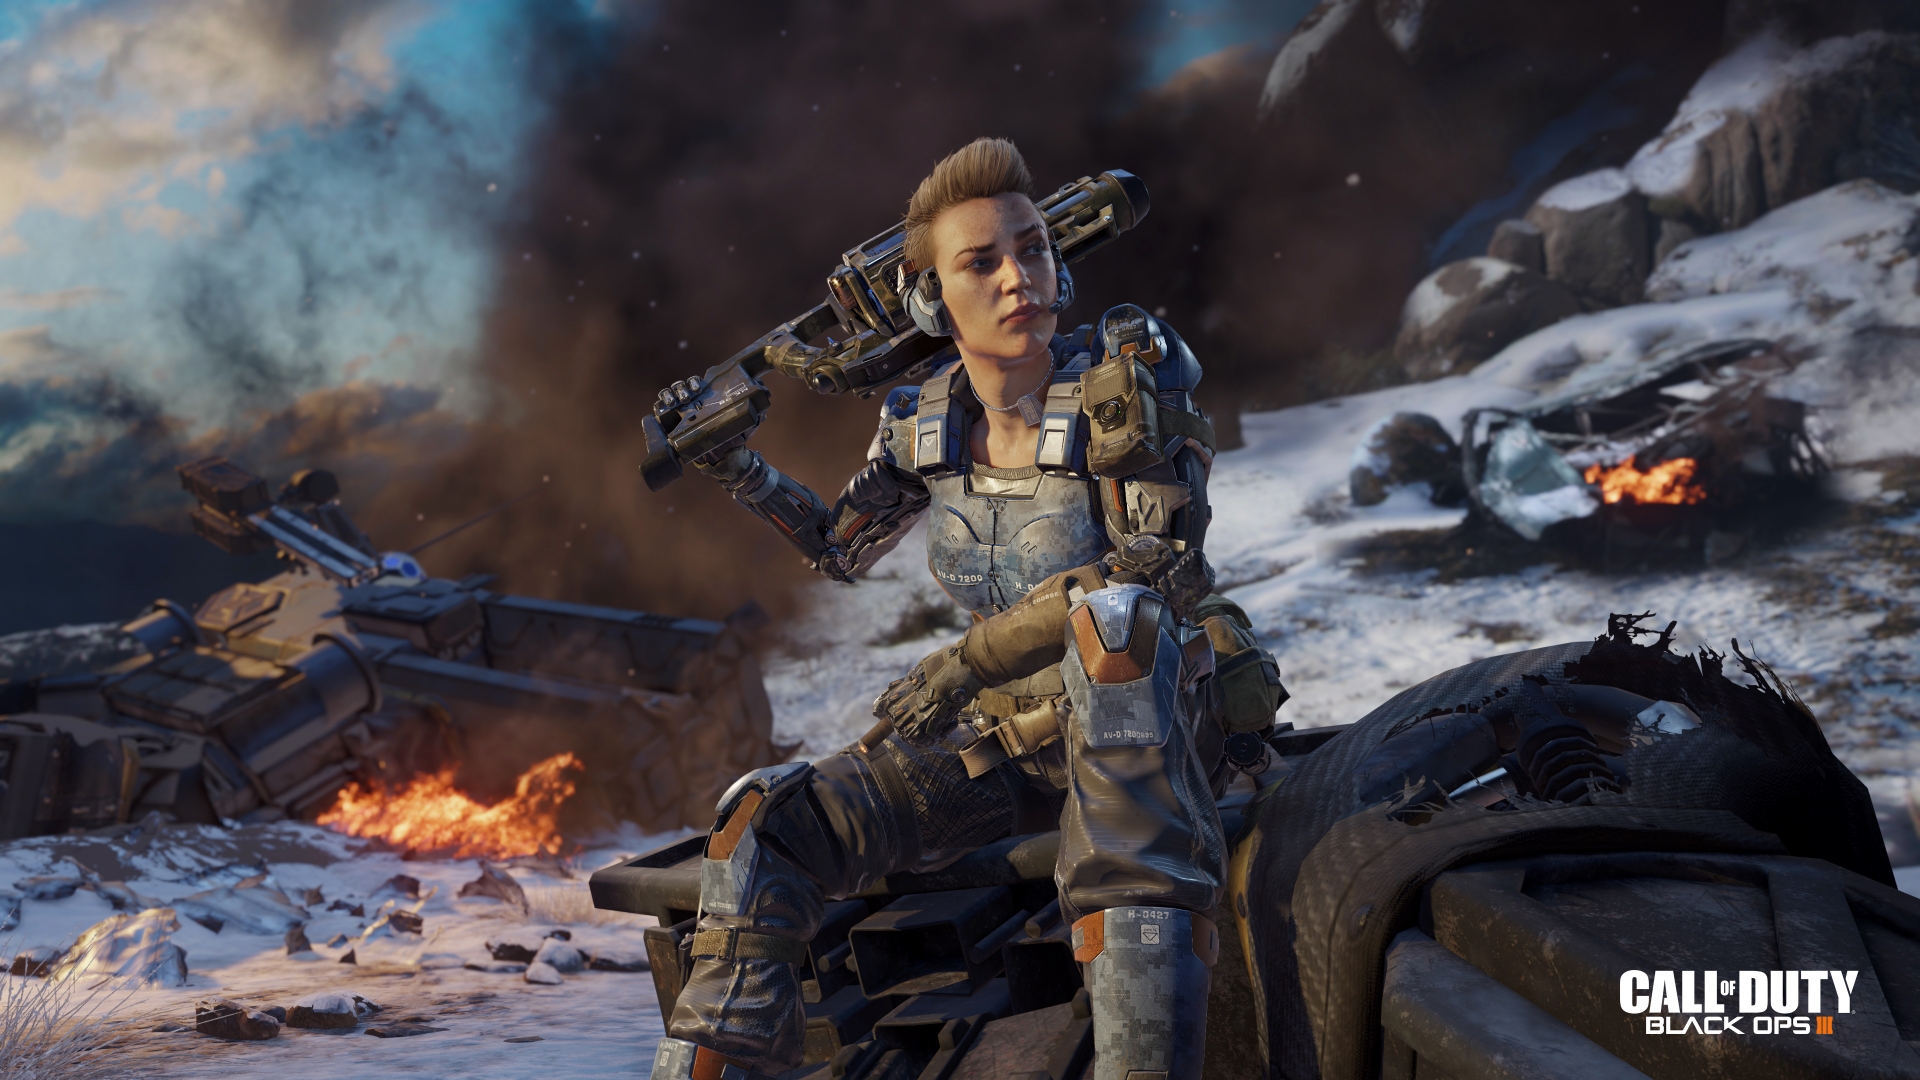 Call of Duty Black Ops 3 Girl for 1920 x 1080 HDTV 1080p resolution